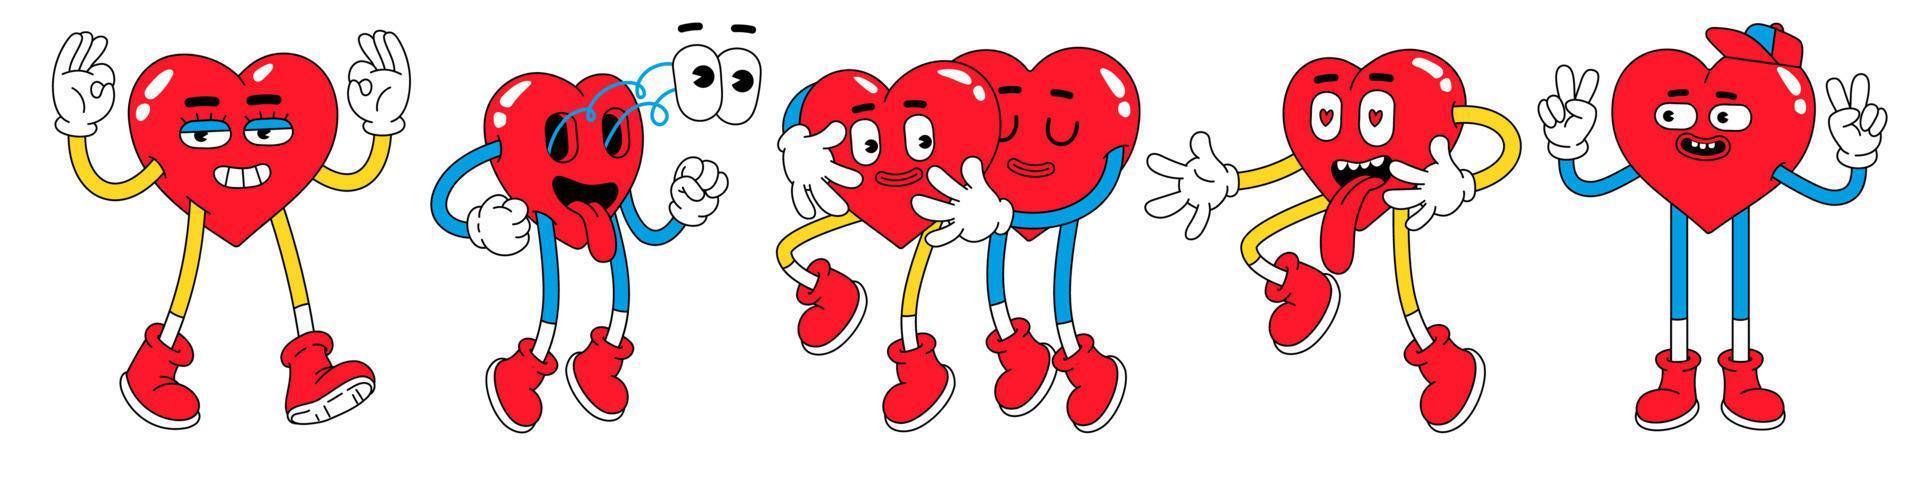 Hearts funny cartoon characters. Valentines day vector illustrations in trendy retro cartoon style. Love concept.